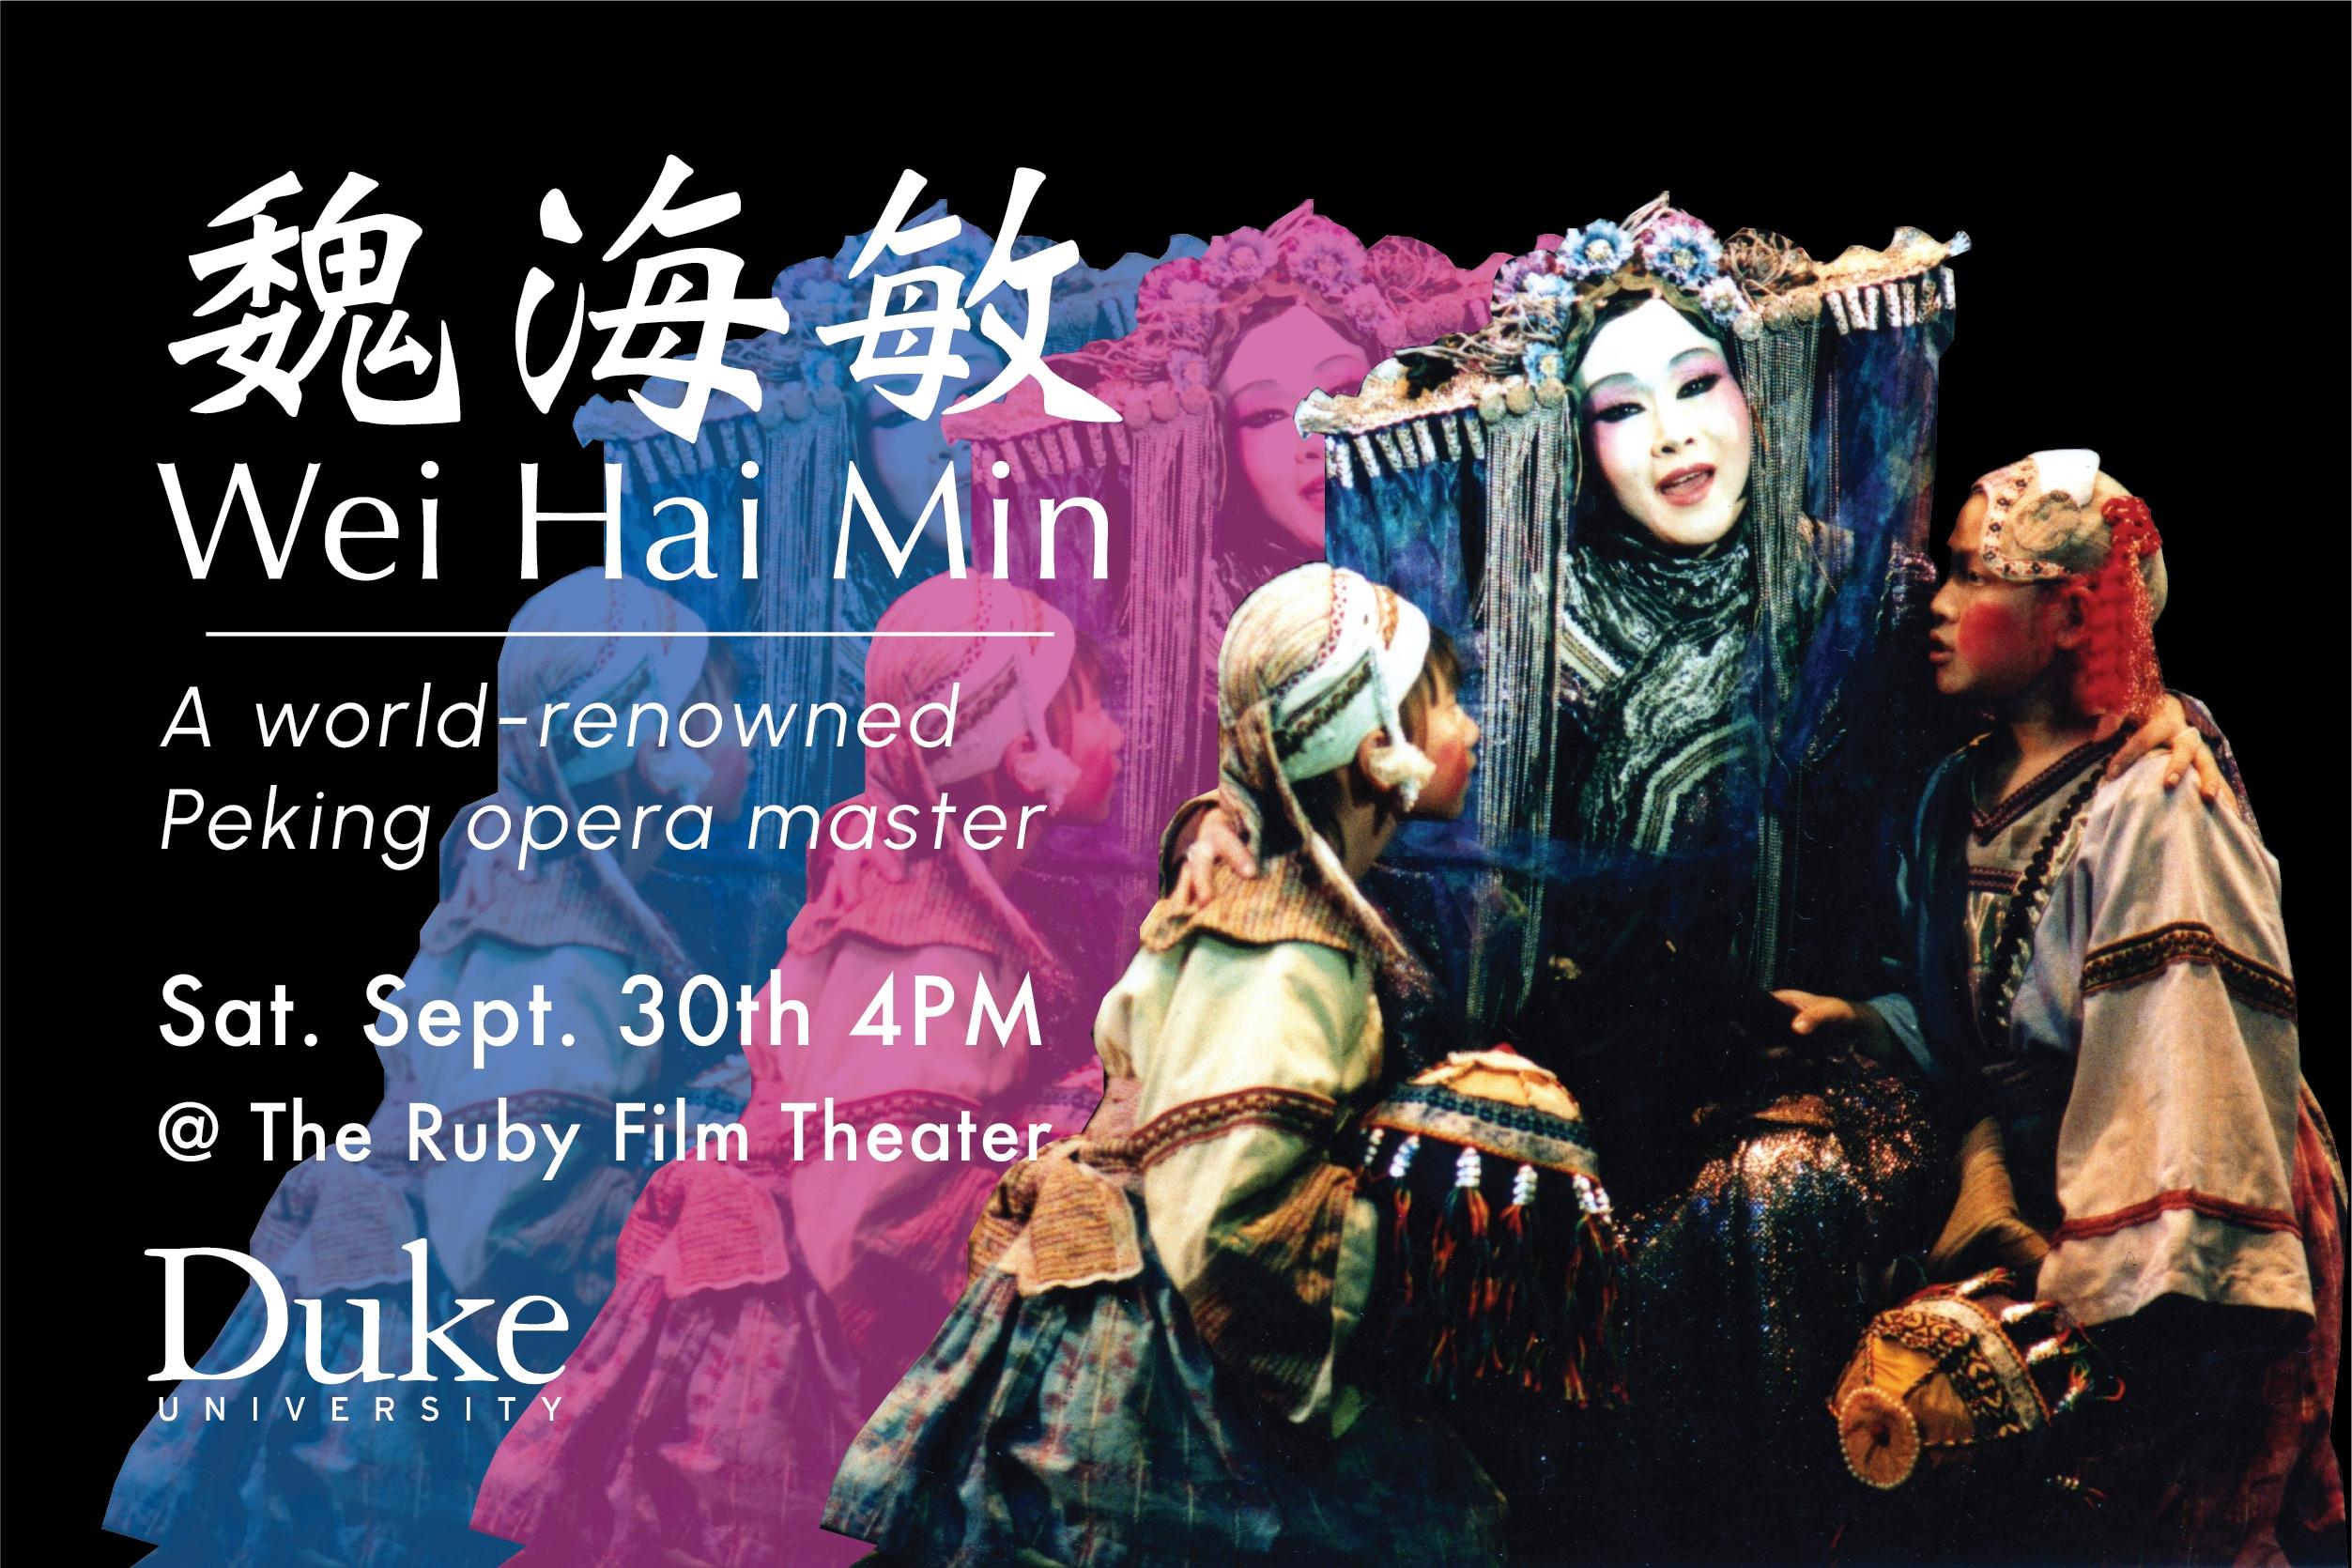 Event description (title, speaker, date, time, location); layered photo of Chinese Opera performers in full costume